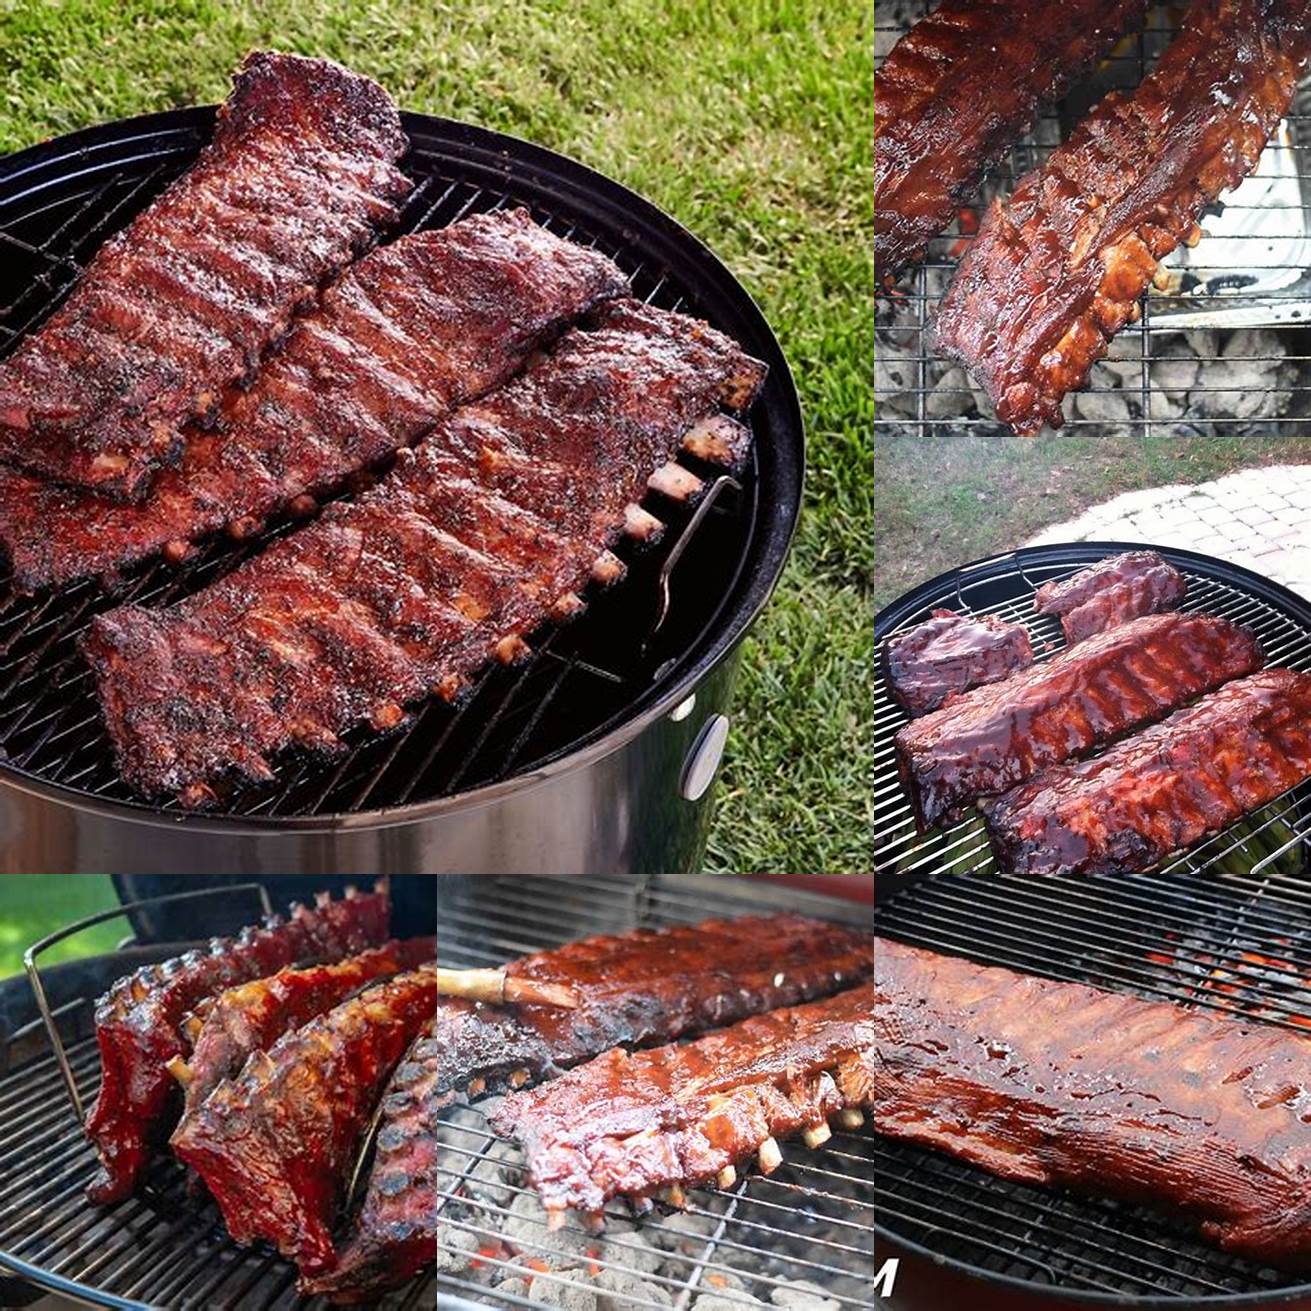 Charcoal grill with smoked ribs